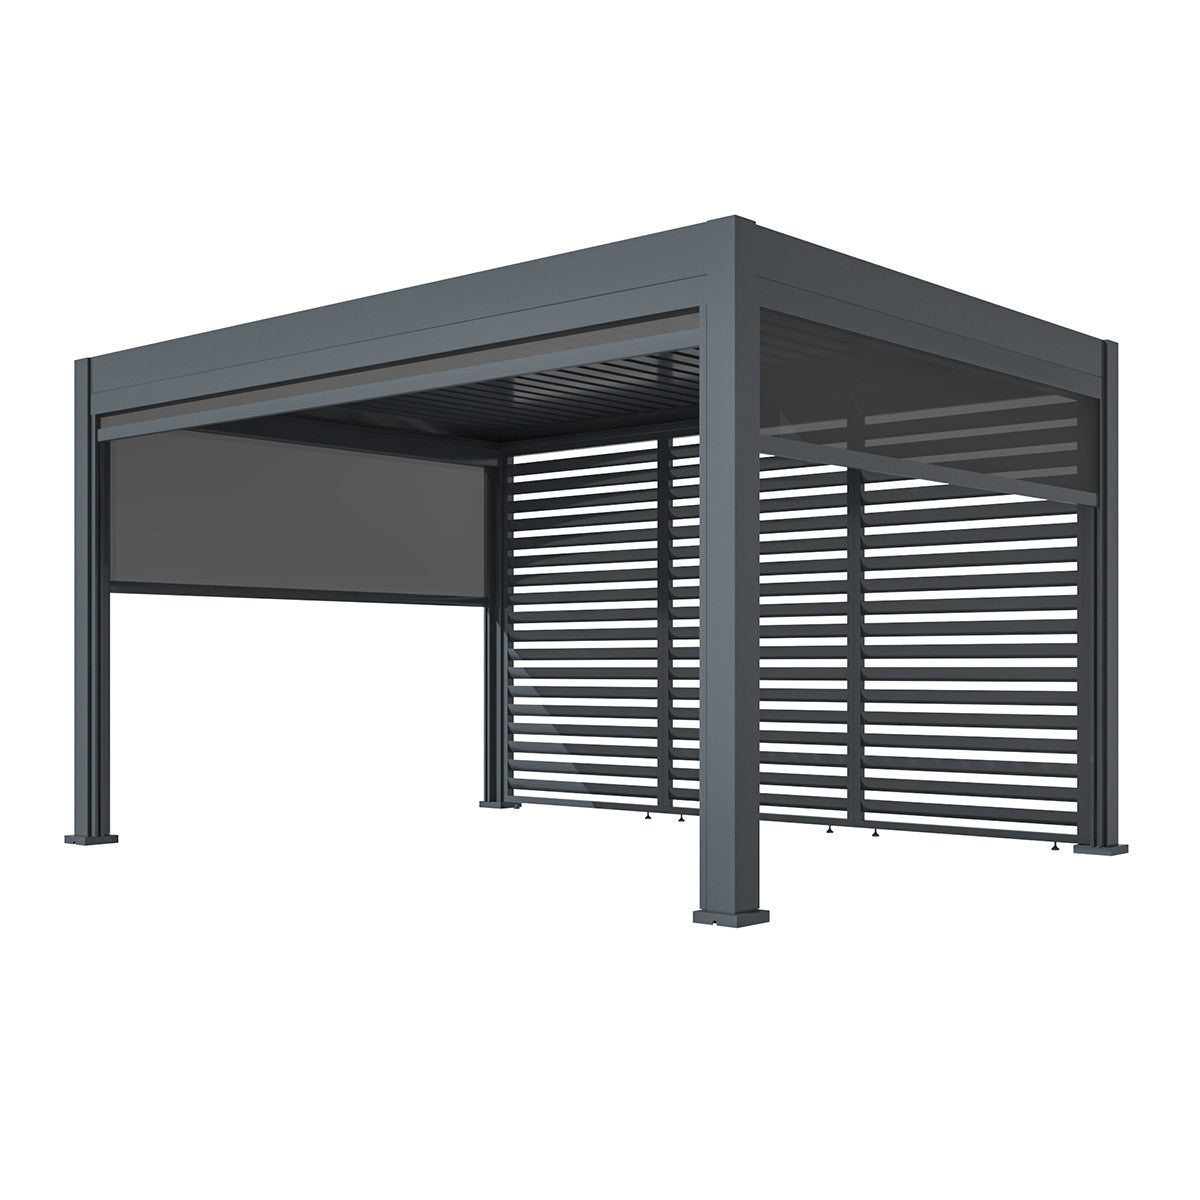 Maze Eden Pergola Aluminium Square 40x40 / Louvre Wall 4m / 3x Blinds White Background With Blinds Down-Better Bed Company